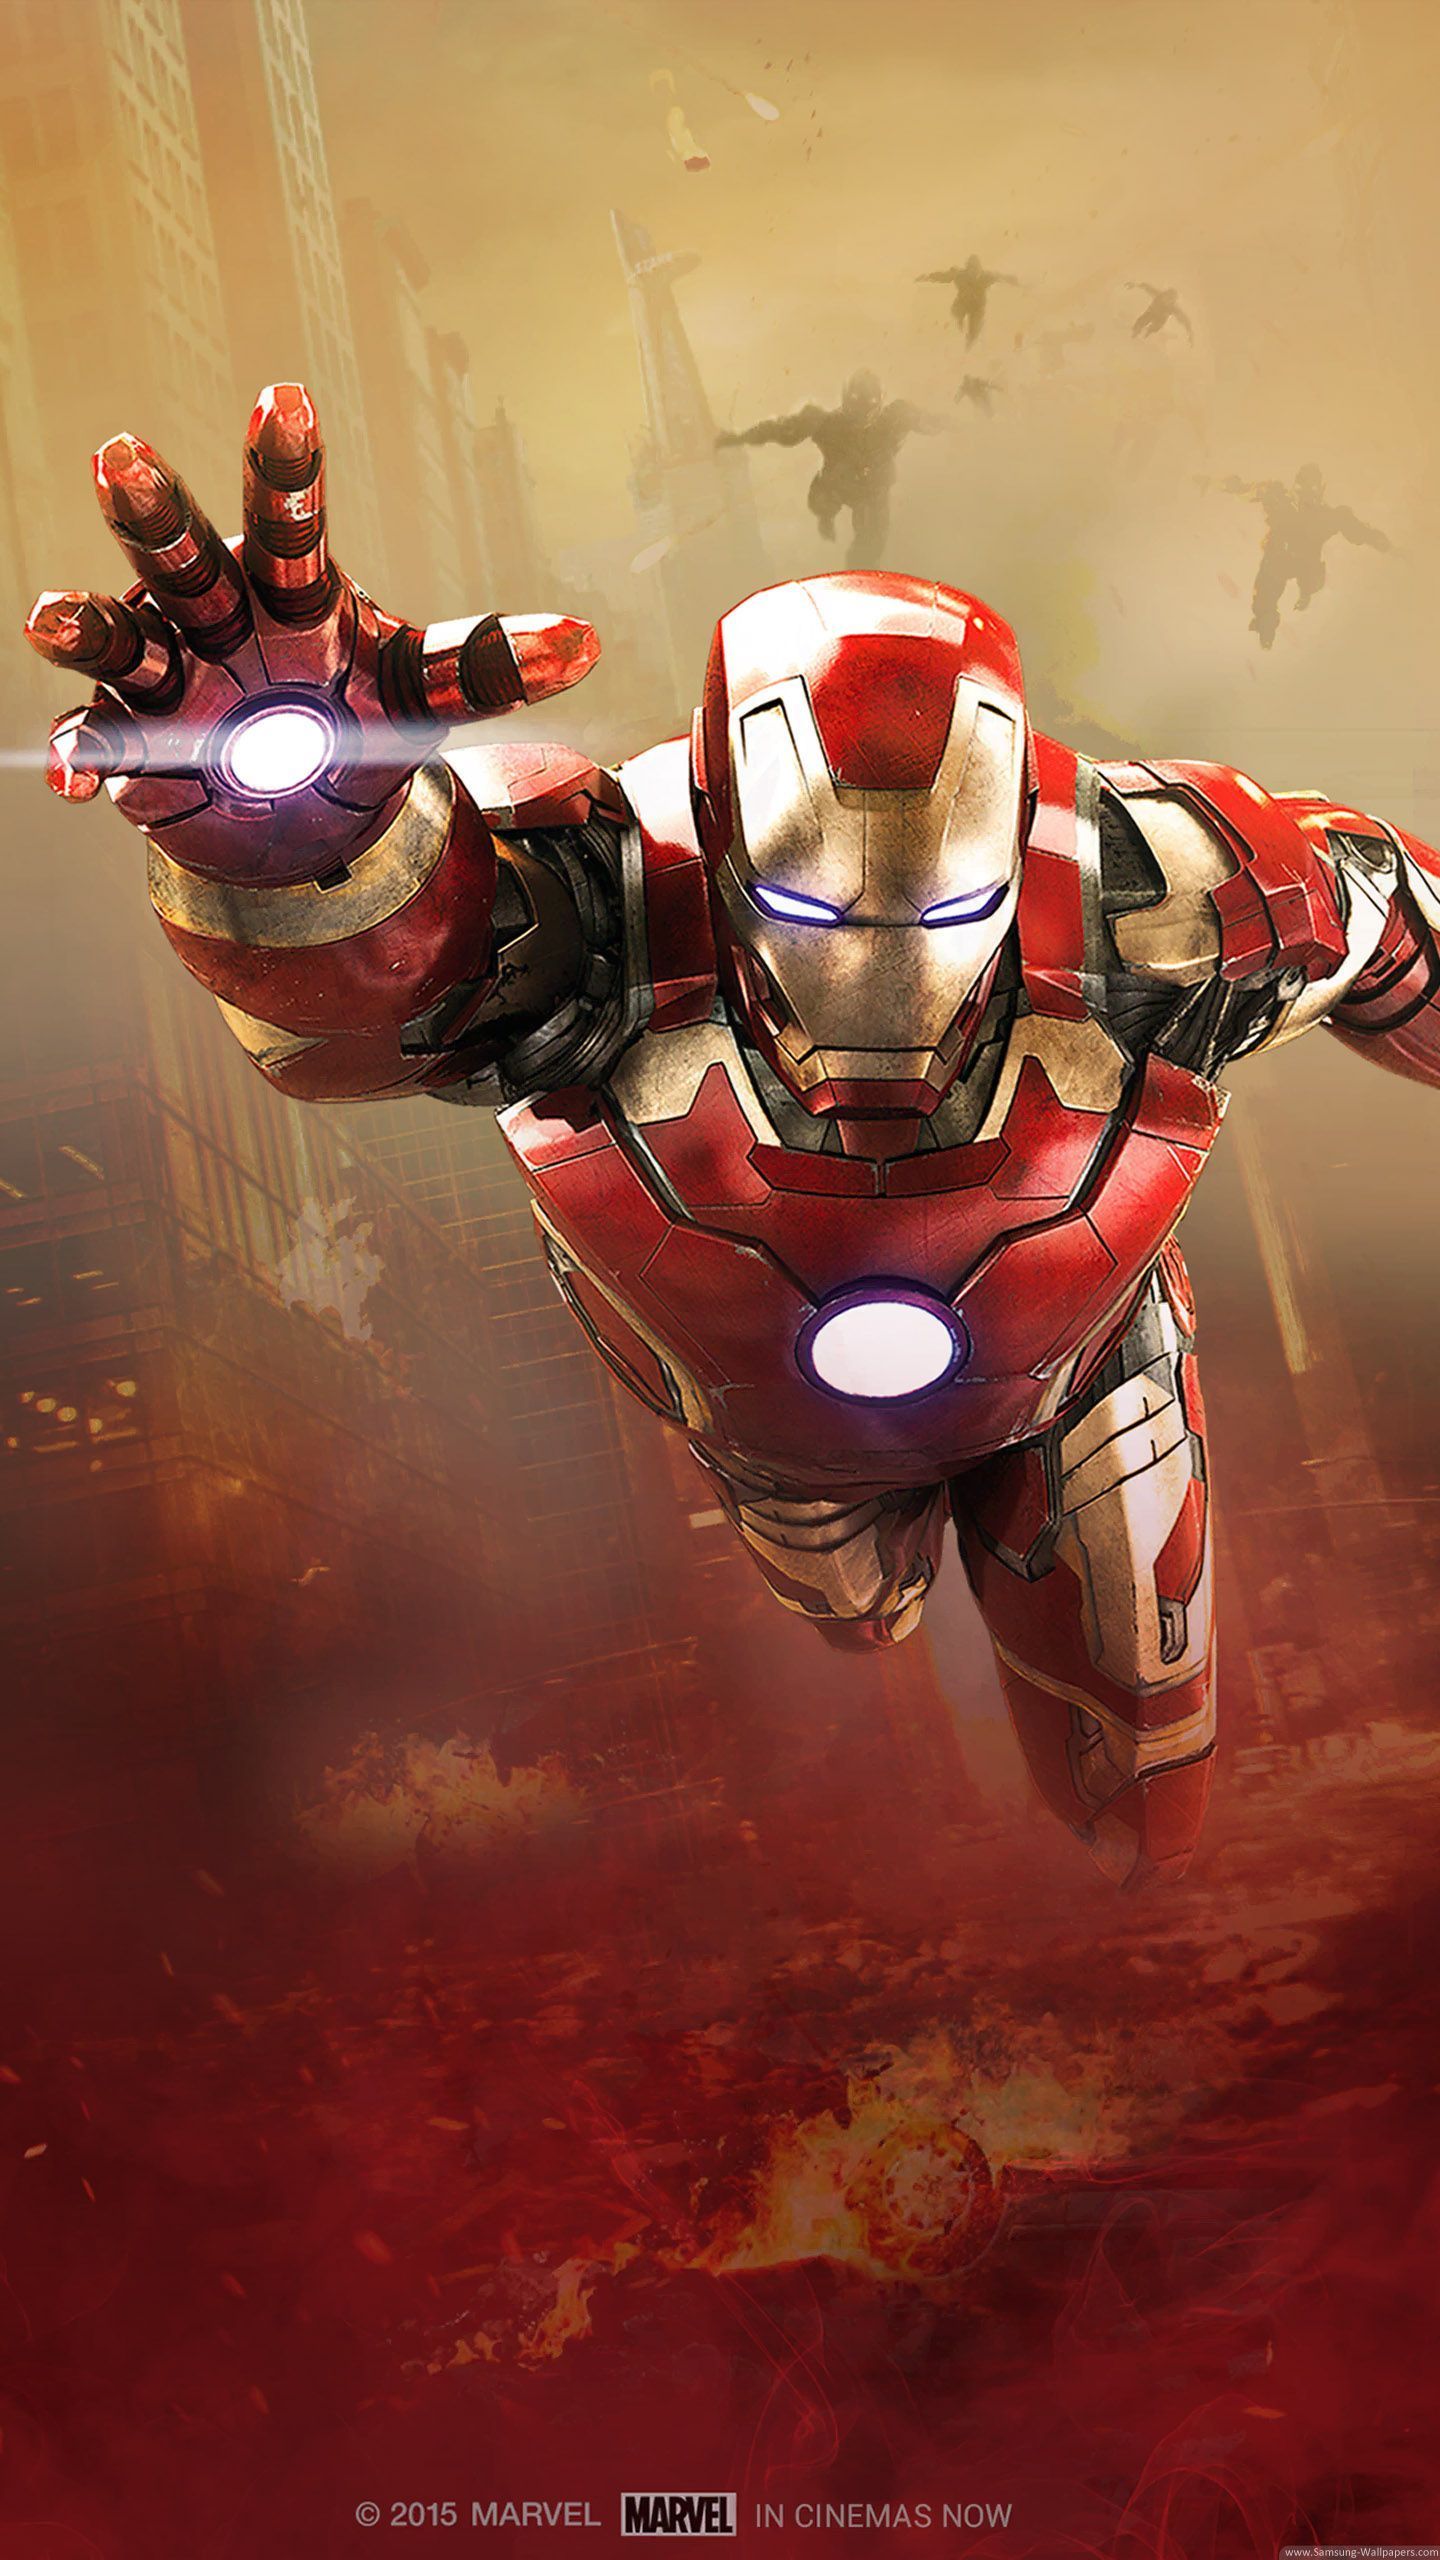 Iron Man Hd Wallpapers For Mobile 
 Data-src /full/1183272 - Iron Man Mobile Wallpaper Hd - HD Wallpaper 